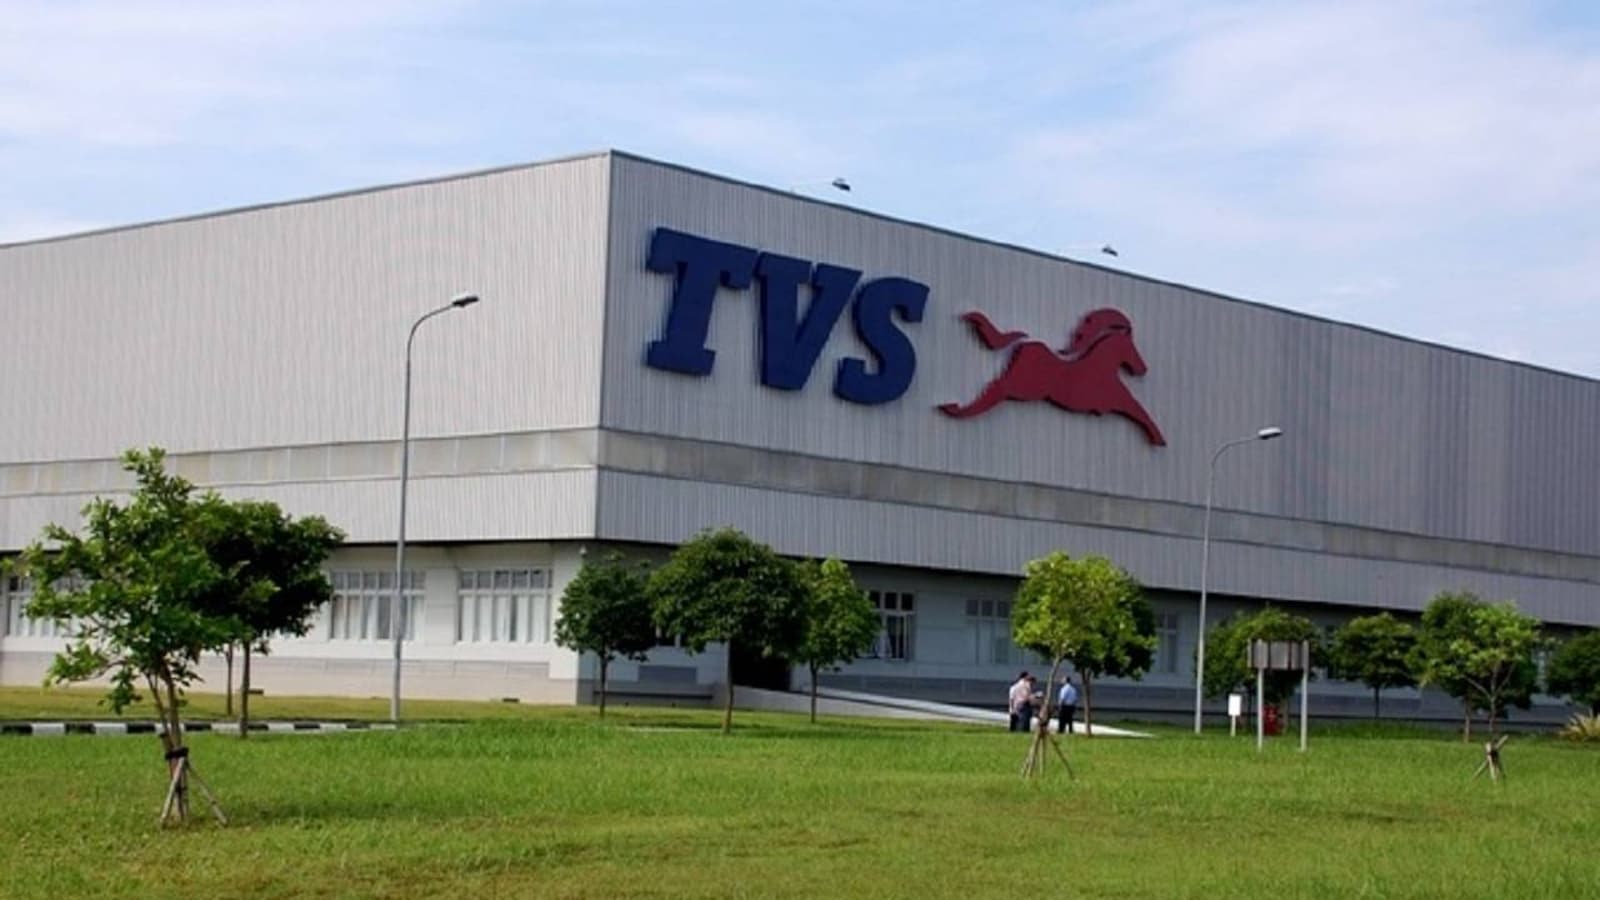 Lingotto buys additional 16.5% stake in TVS Industrial and Logistics Parks